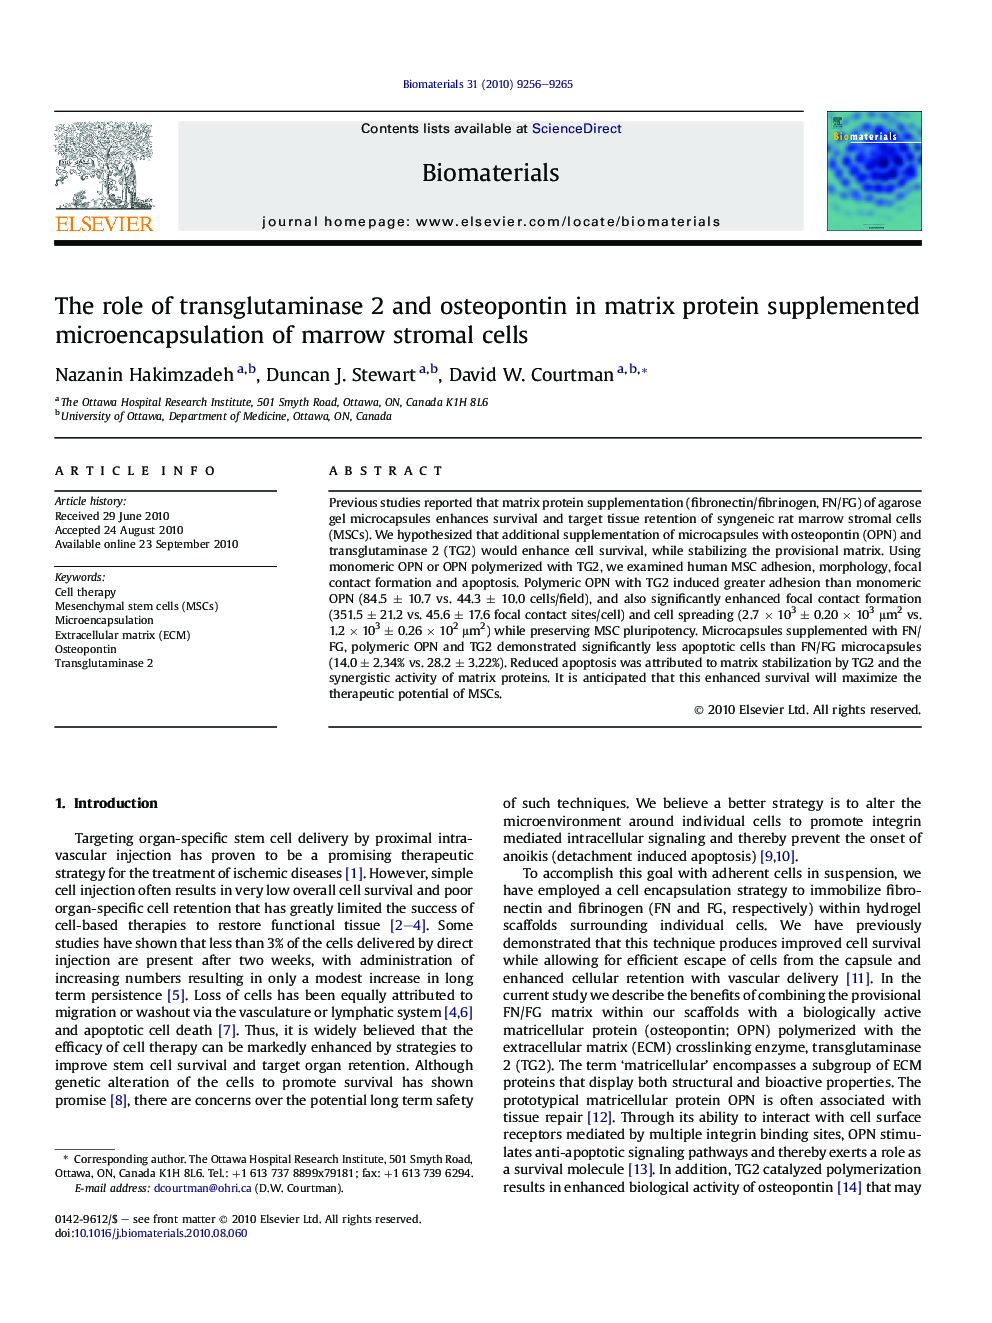 The role of transglutaminase 2 and osteopontin in matrix protein supplemented microencapsulation of marrow stromal cells